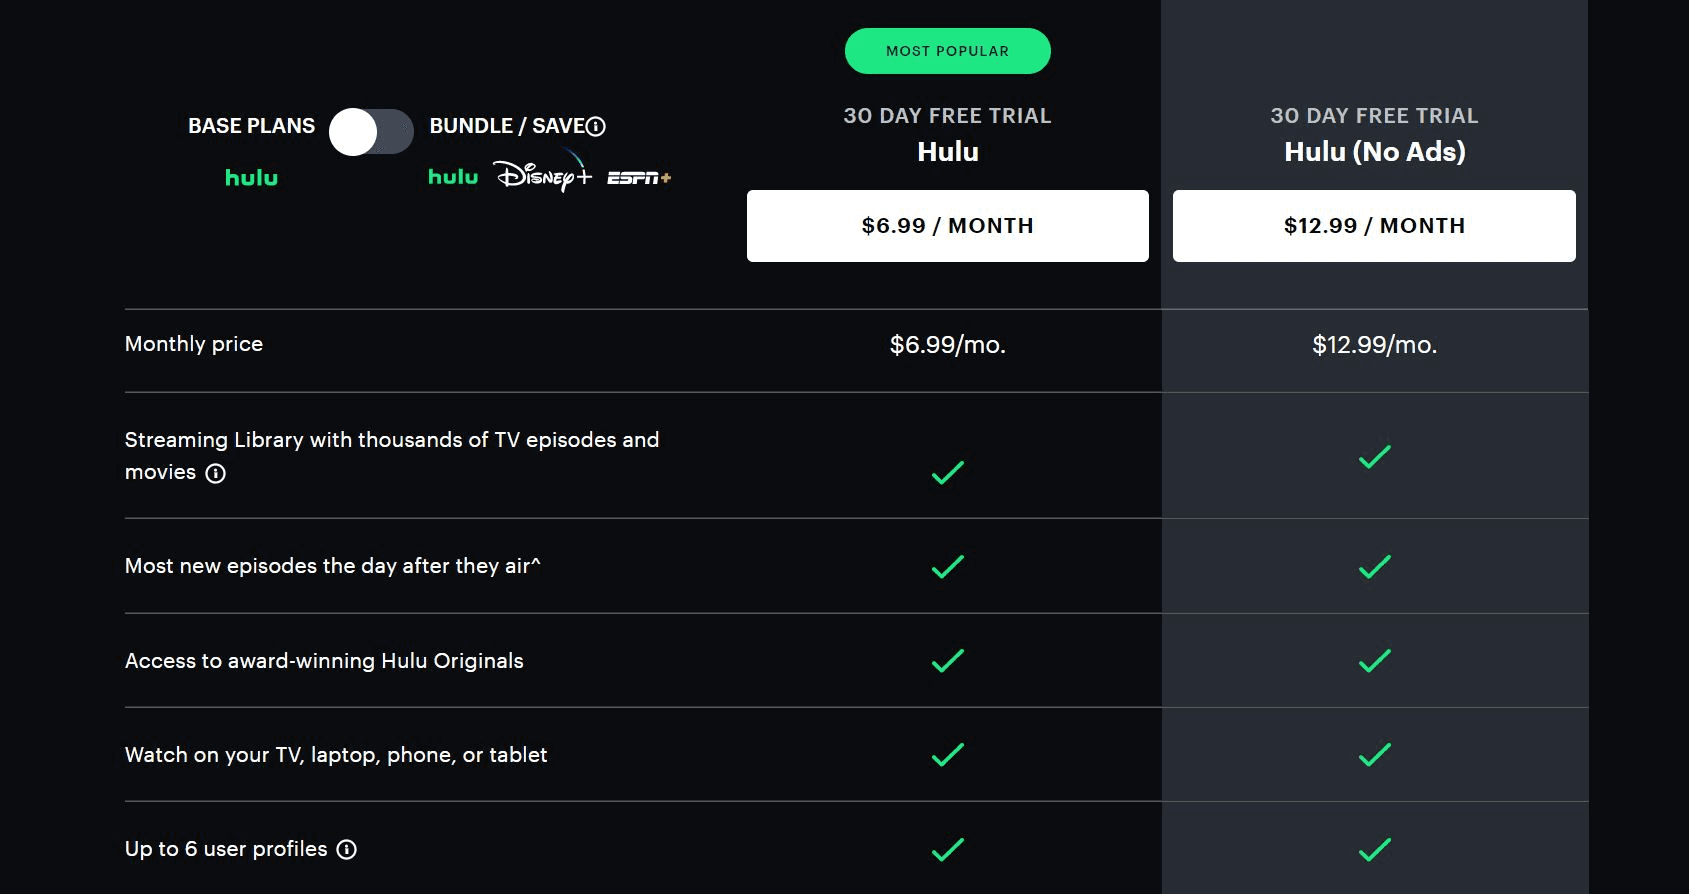 Hulu plans and prices